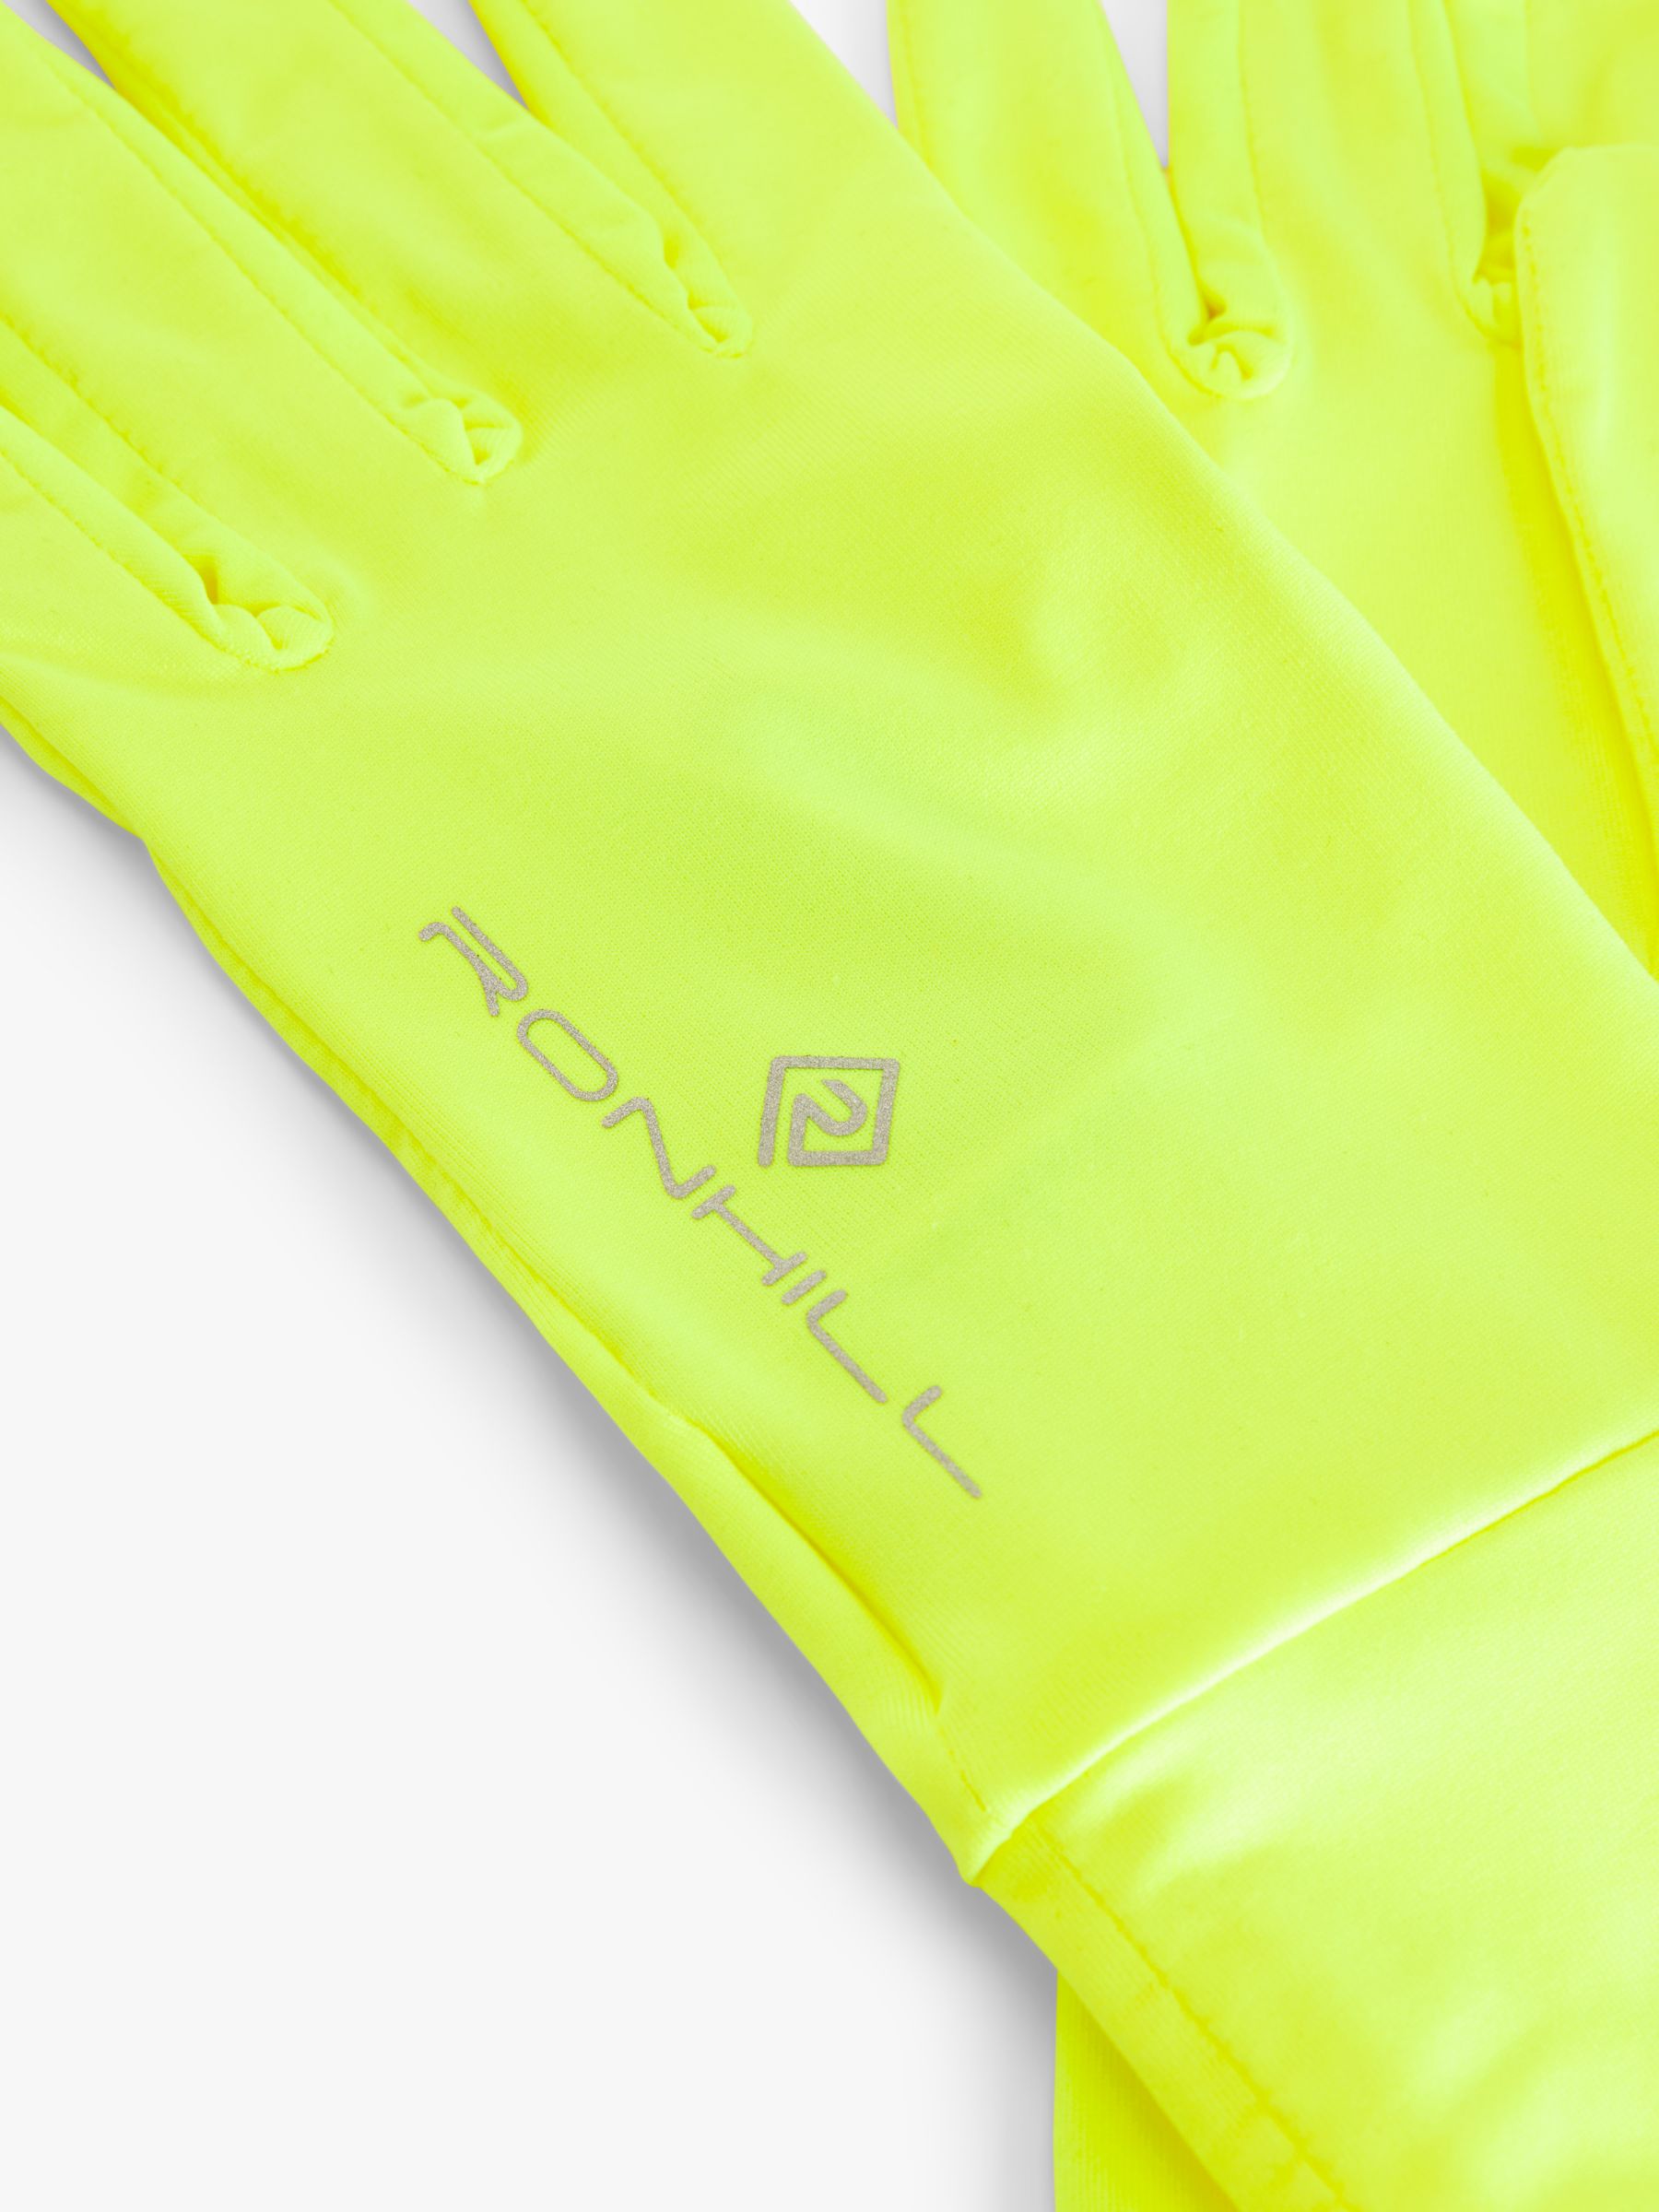 Buy Ronhill Classic Running Gloves, Charcoal/Reflect Yellow Online at johnlewis.com